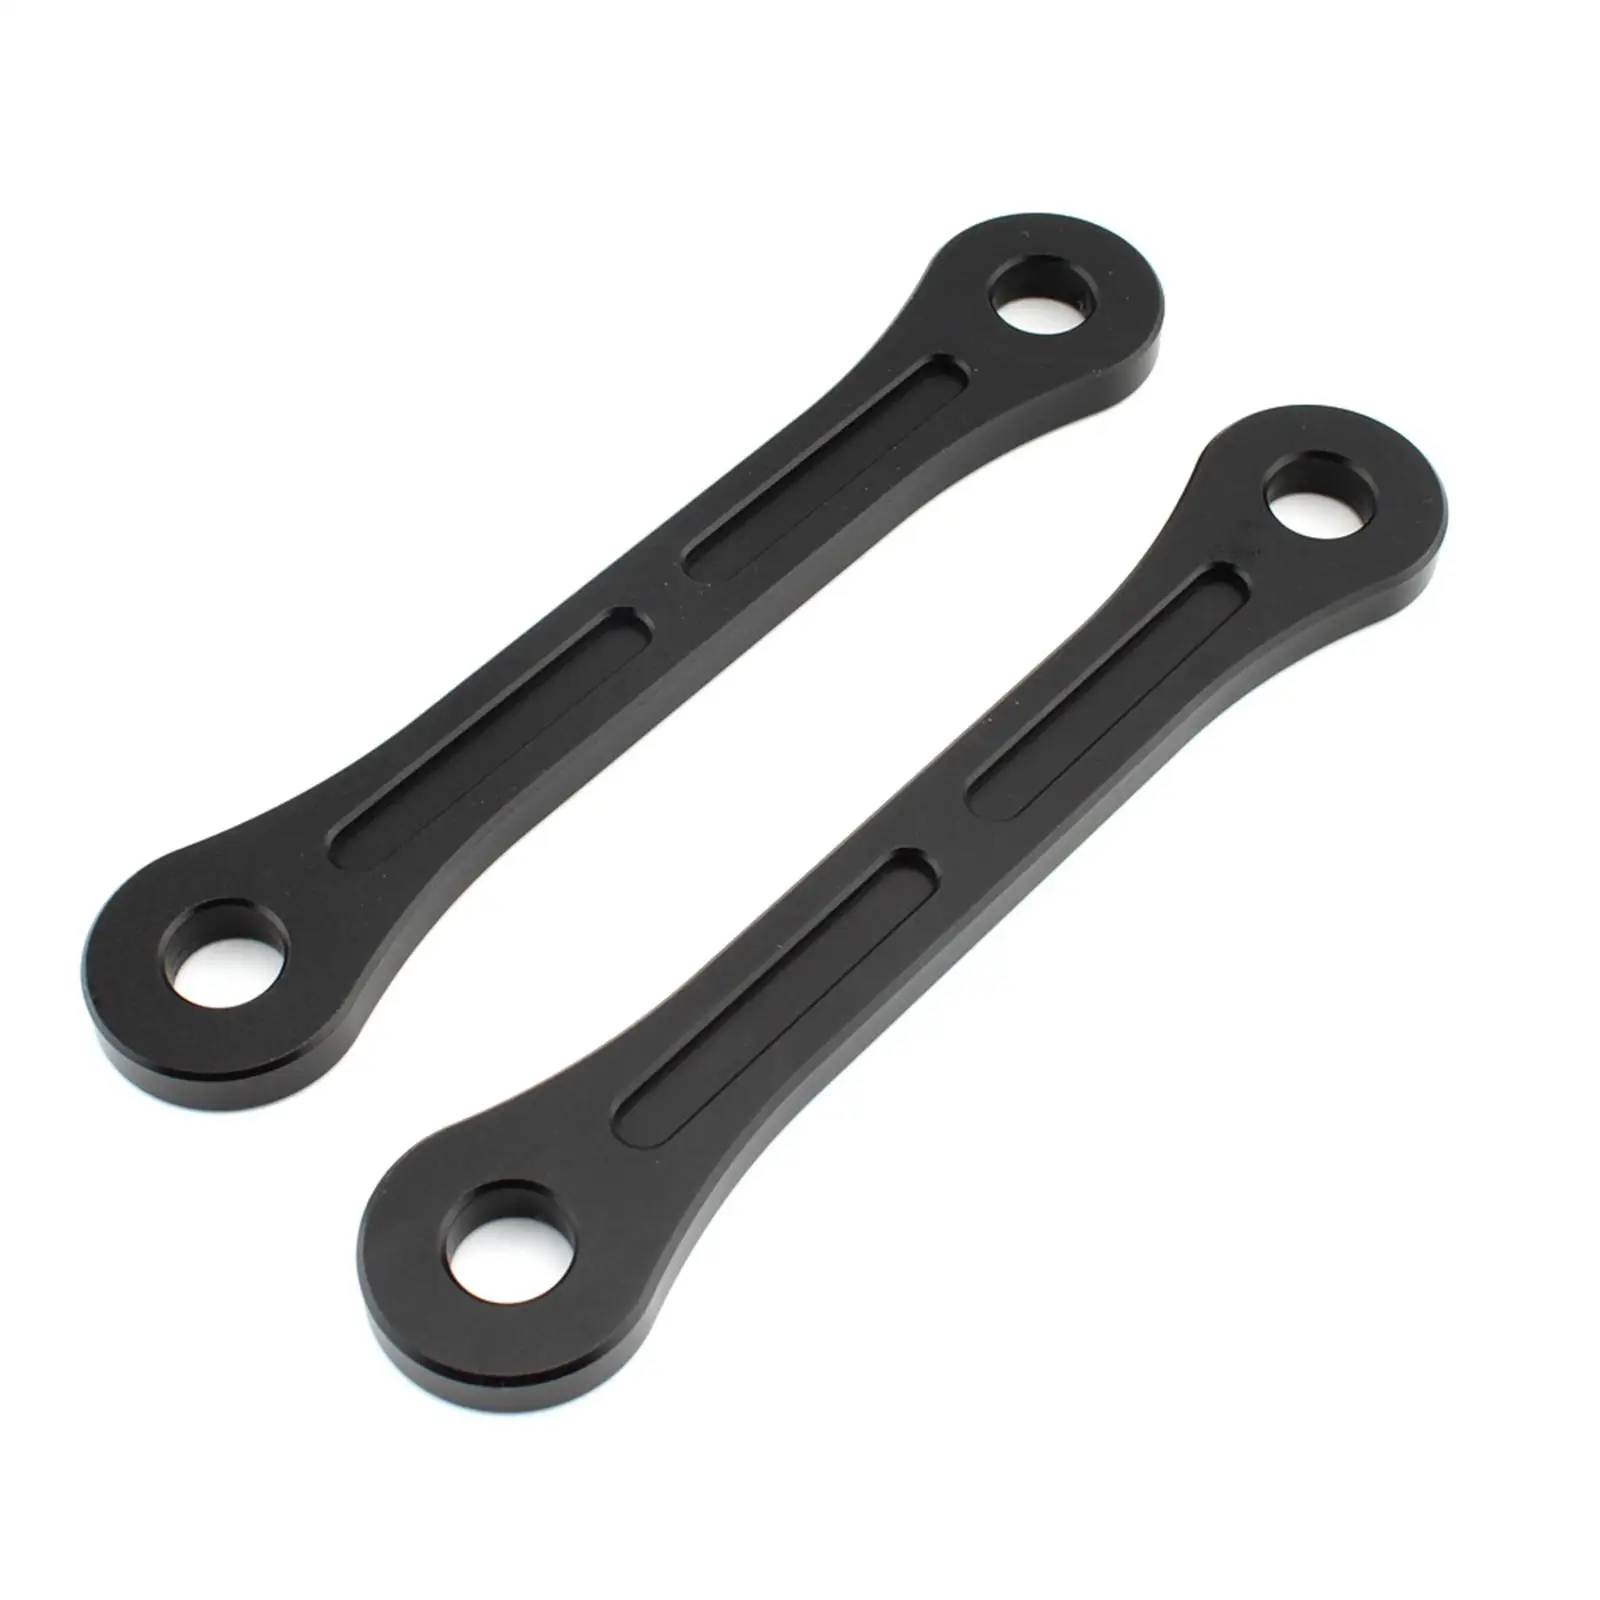 2x Motorcycle Lowering Link Dog Bones Linkages Sturdy Aluminum Alloy Motorcycle